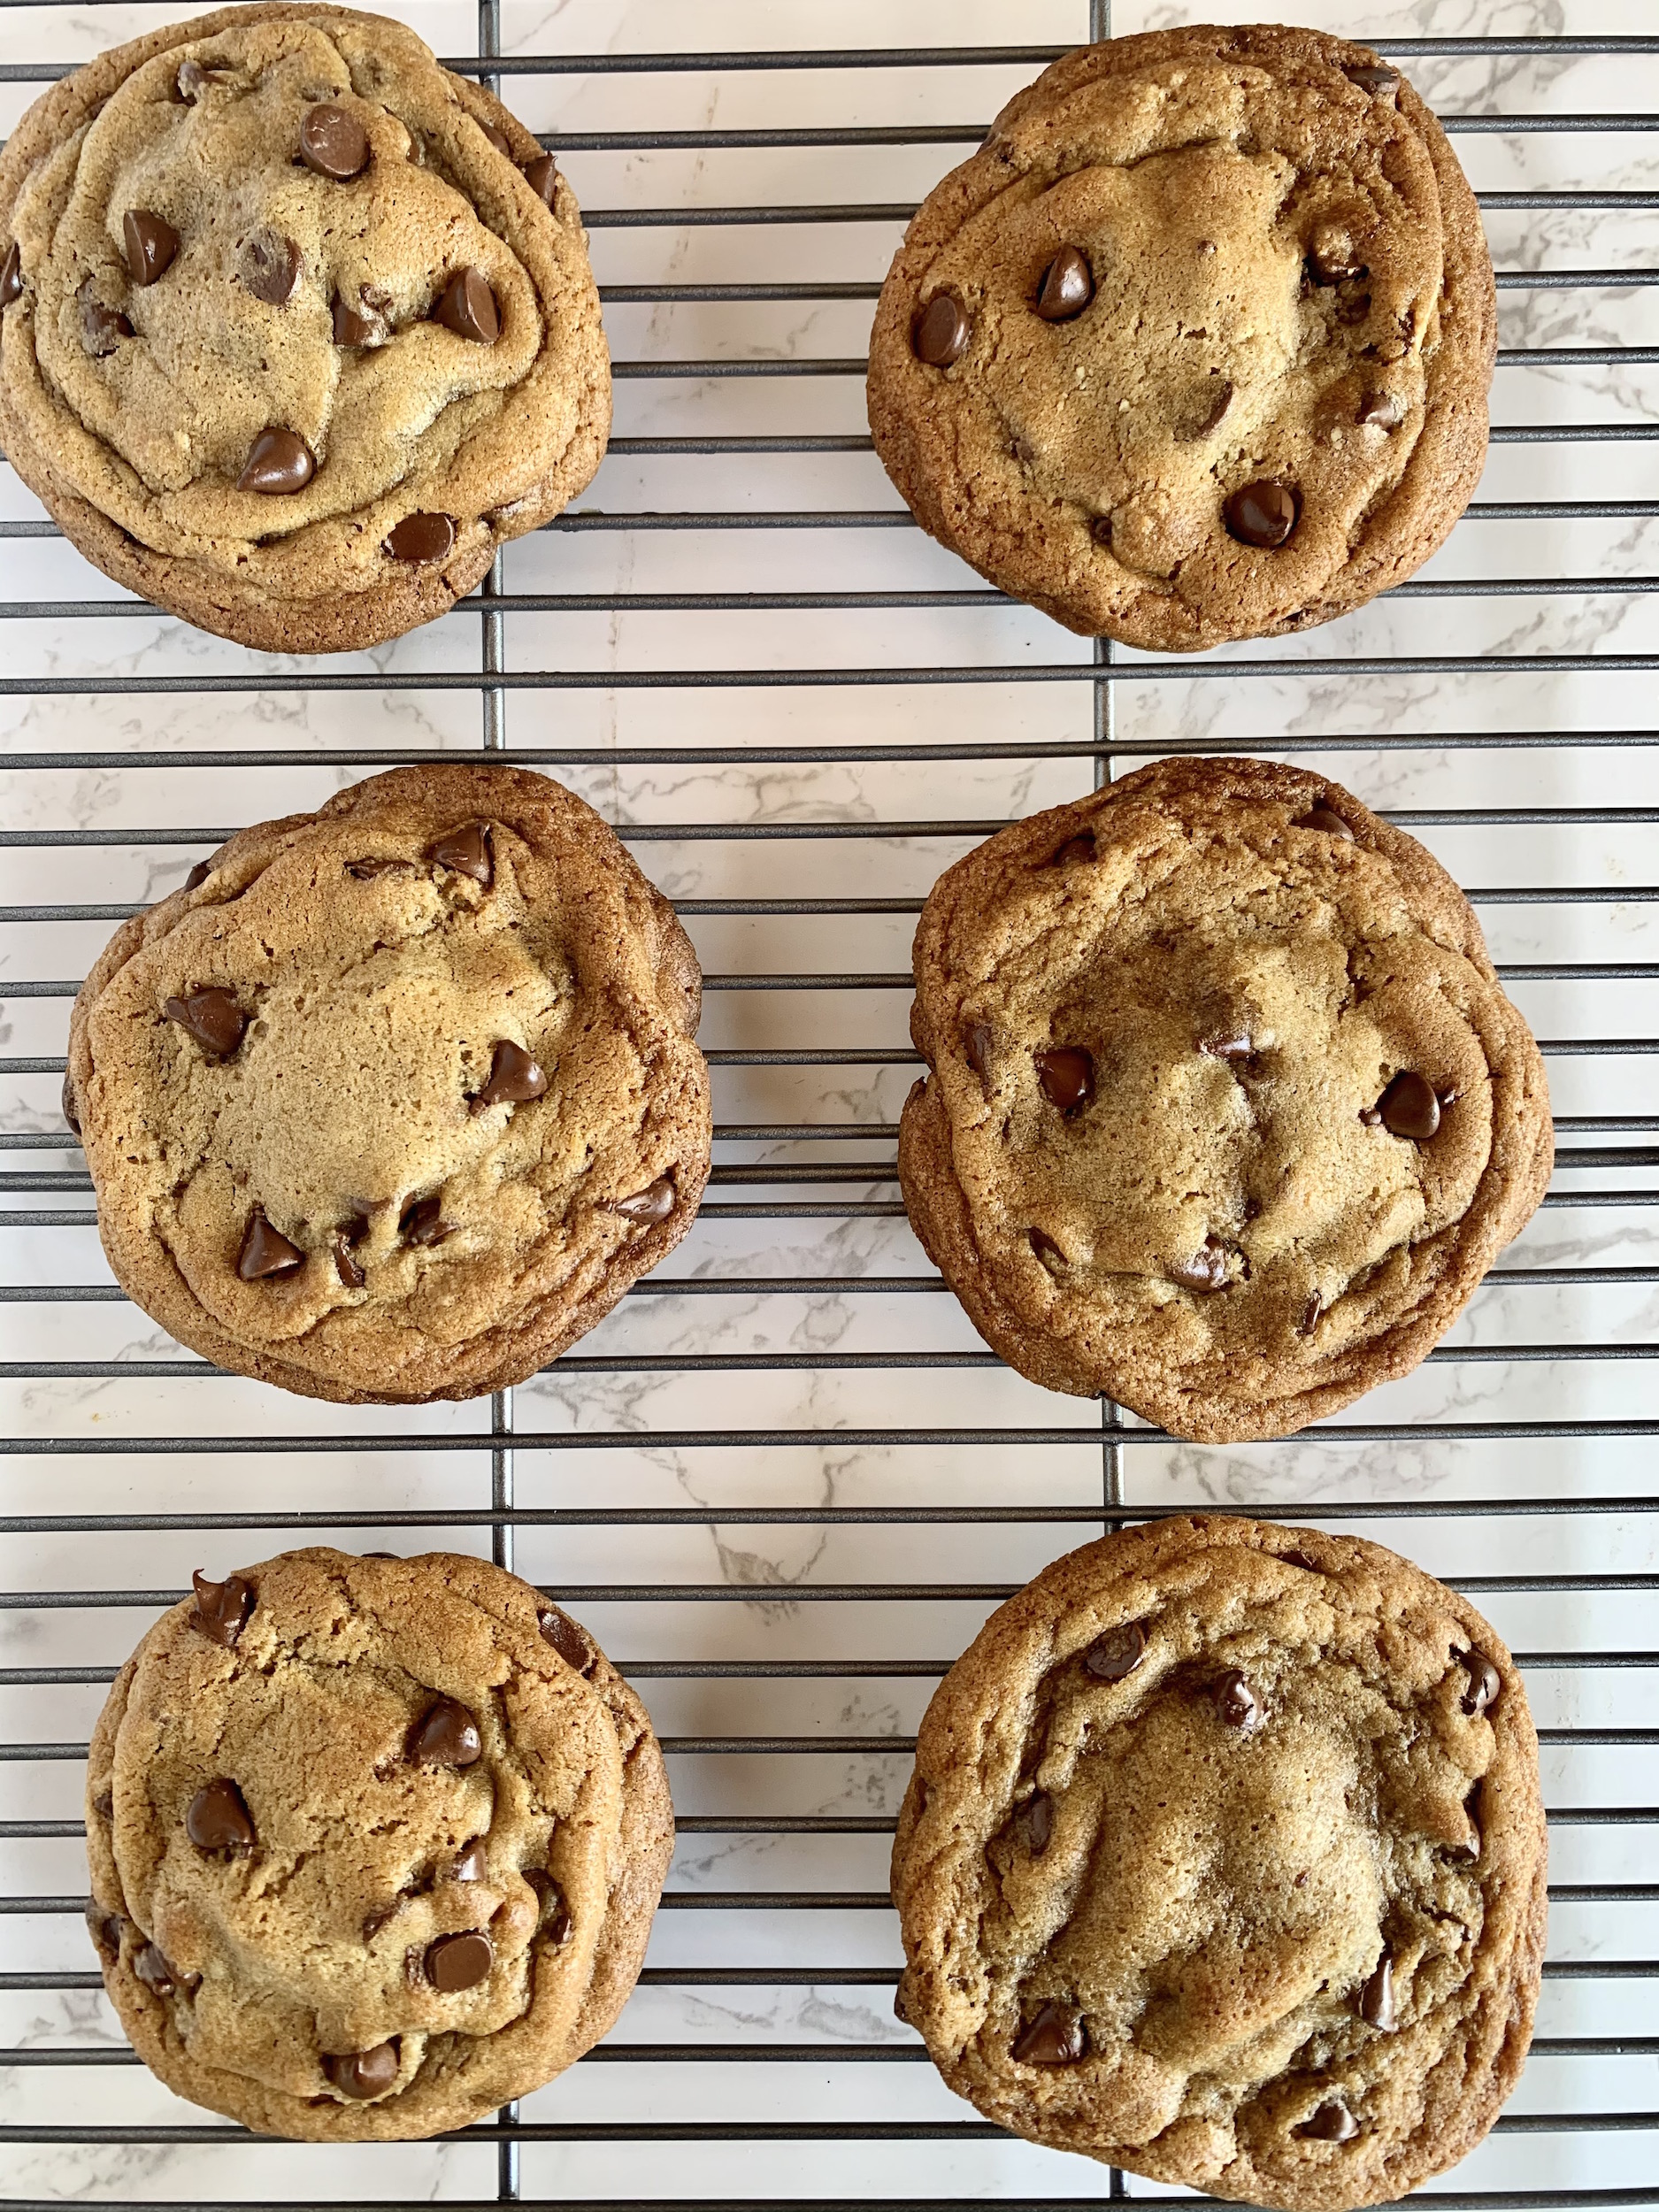 Chocolate Chip Cookies on a Rack